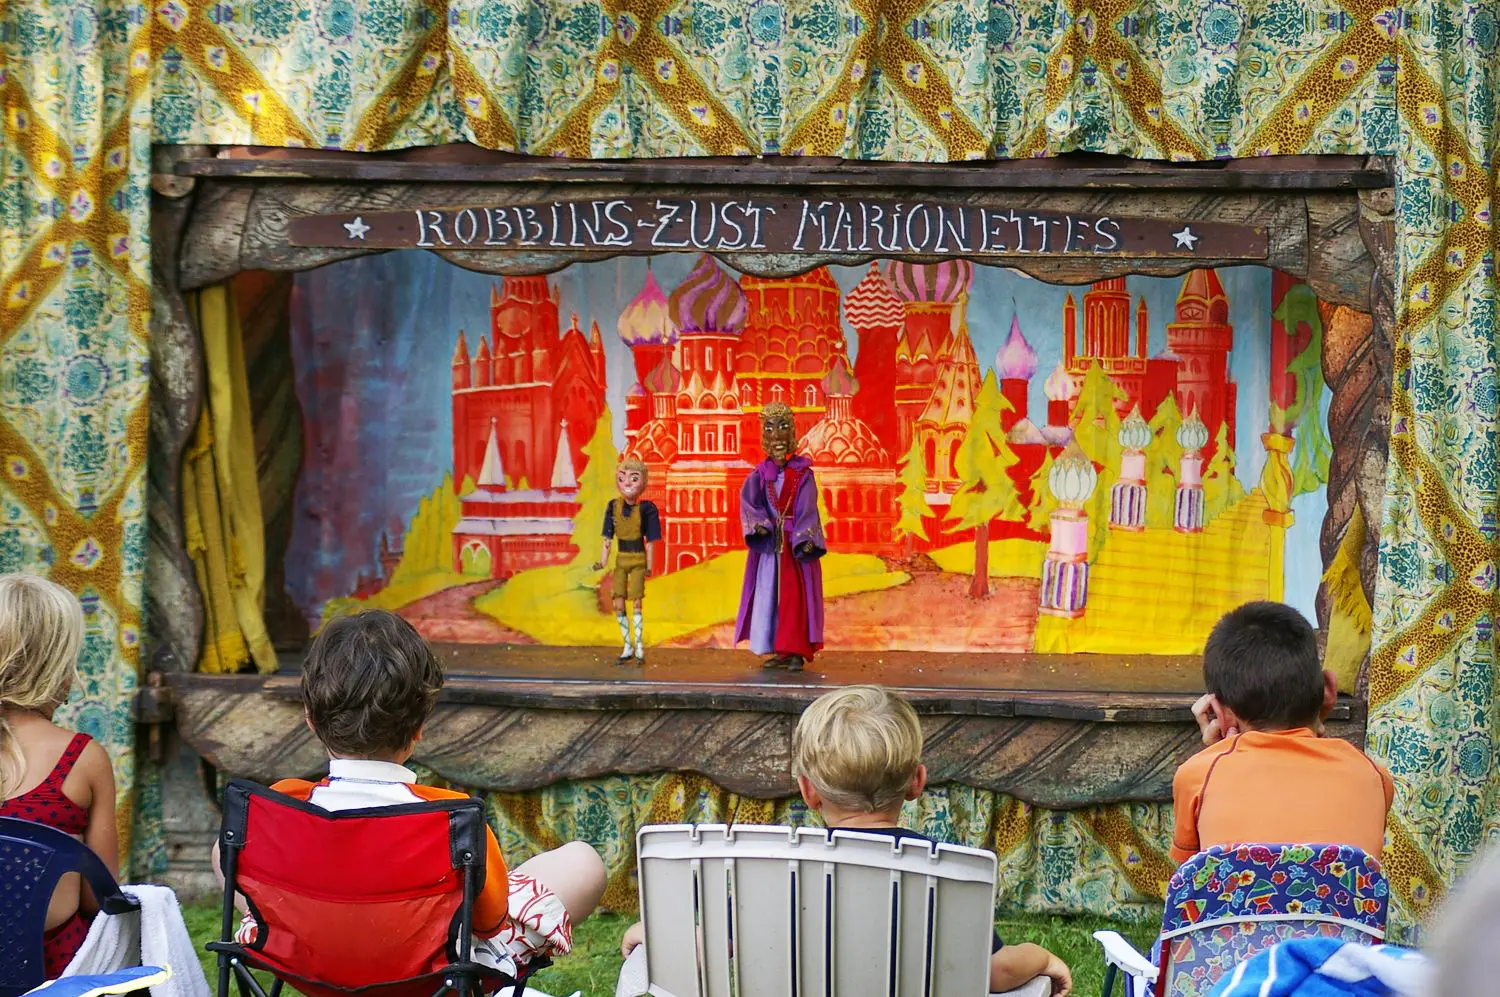 Children watching a colorful marionette performance by Robbins-Zust Marionettes, featuring two puppets on stage against a backdrop of vibrant, painted scenery.